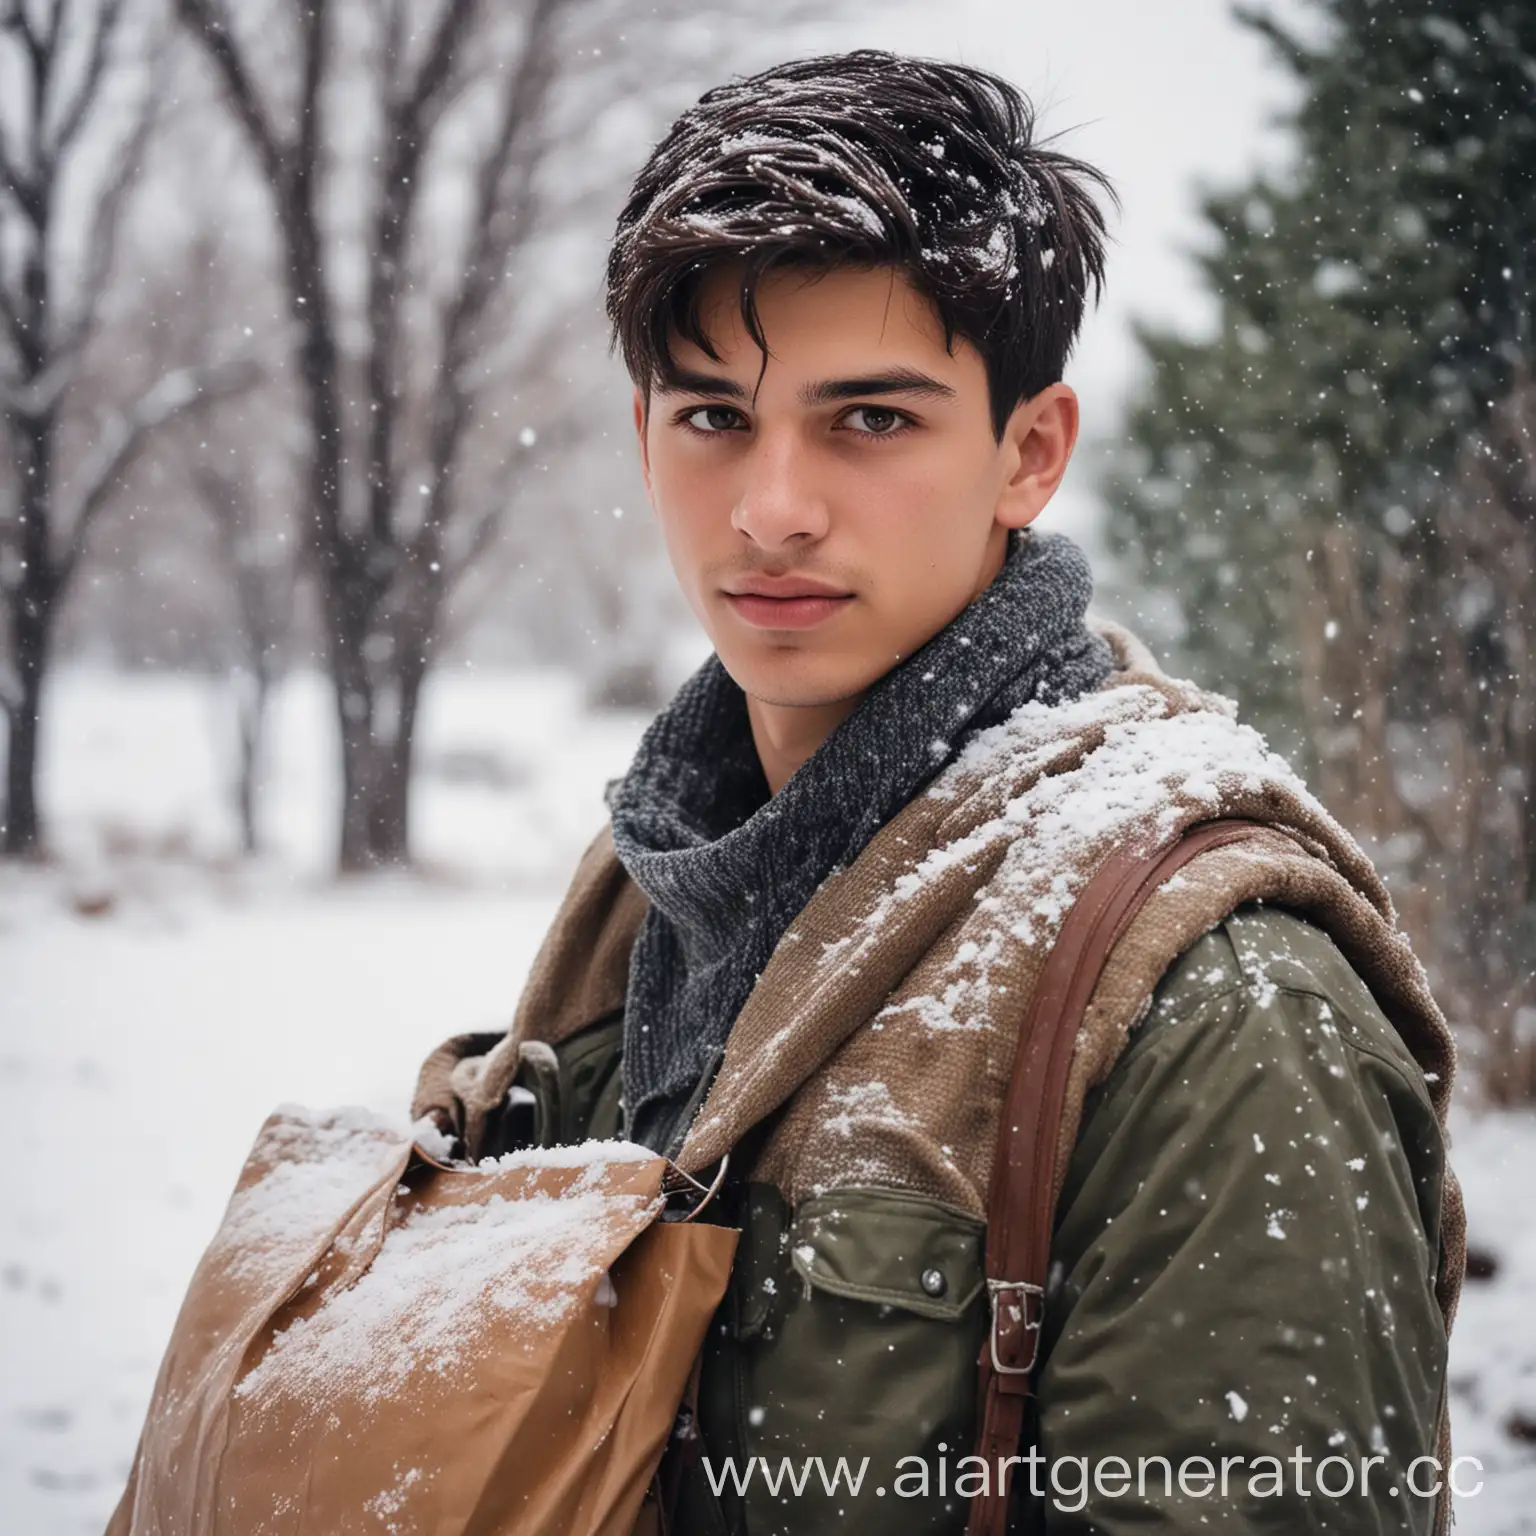 a young guy with dark hair, brown eyes, short haircut, with a bag on his shoulder, and snow around him